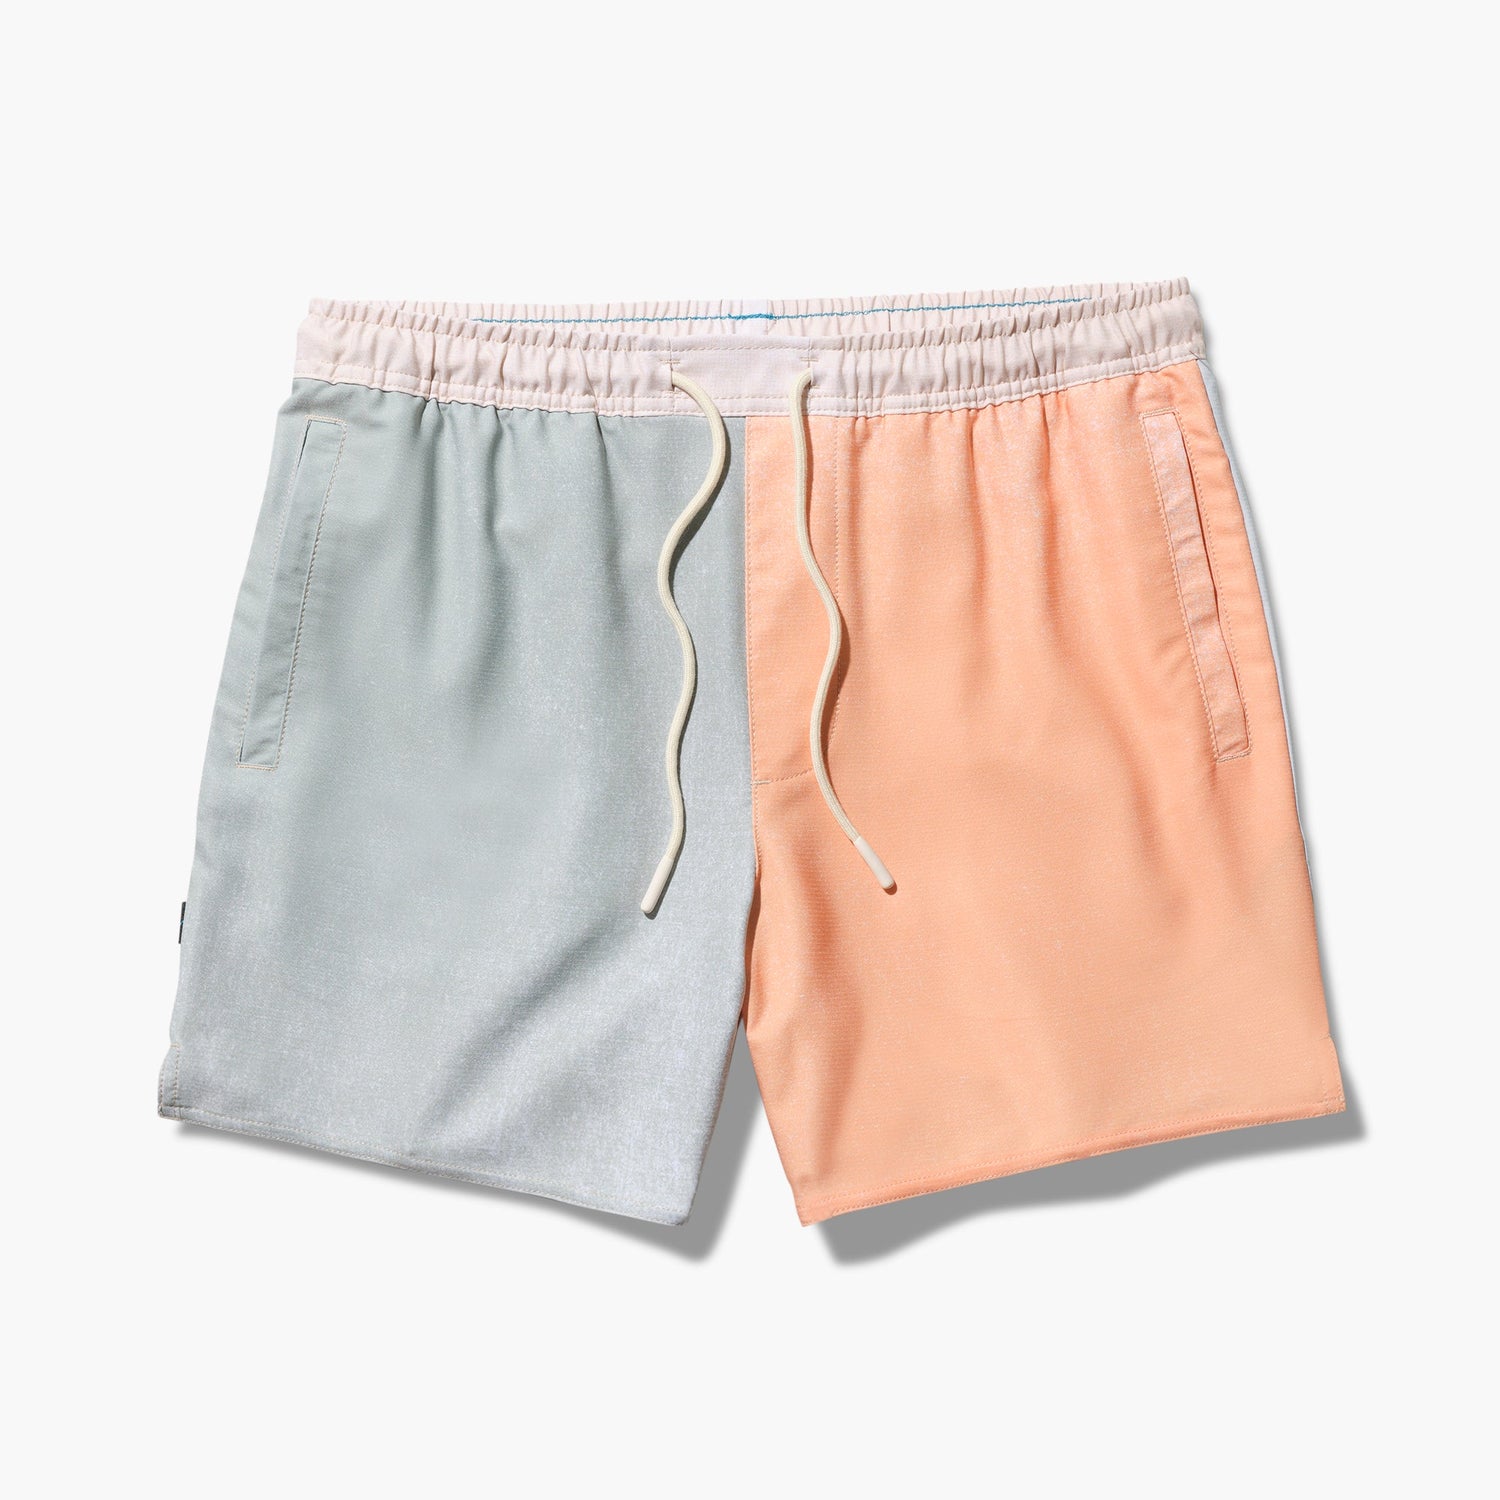 Stance Complex Athletic Short 5" Peach